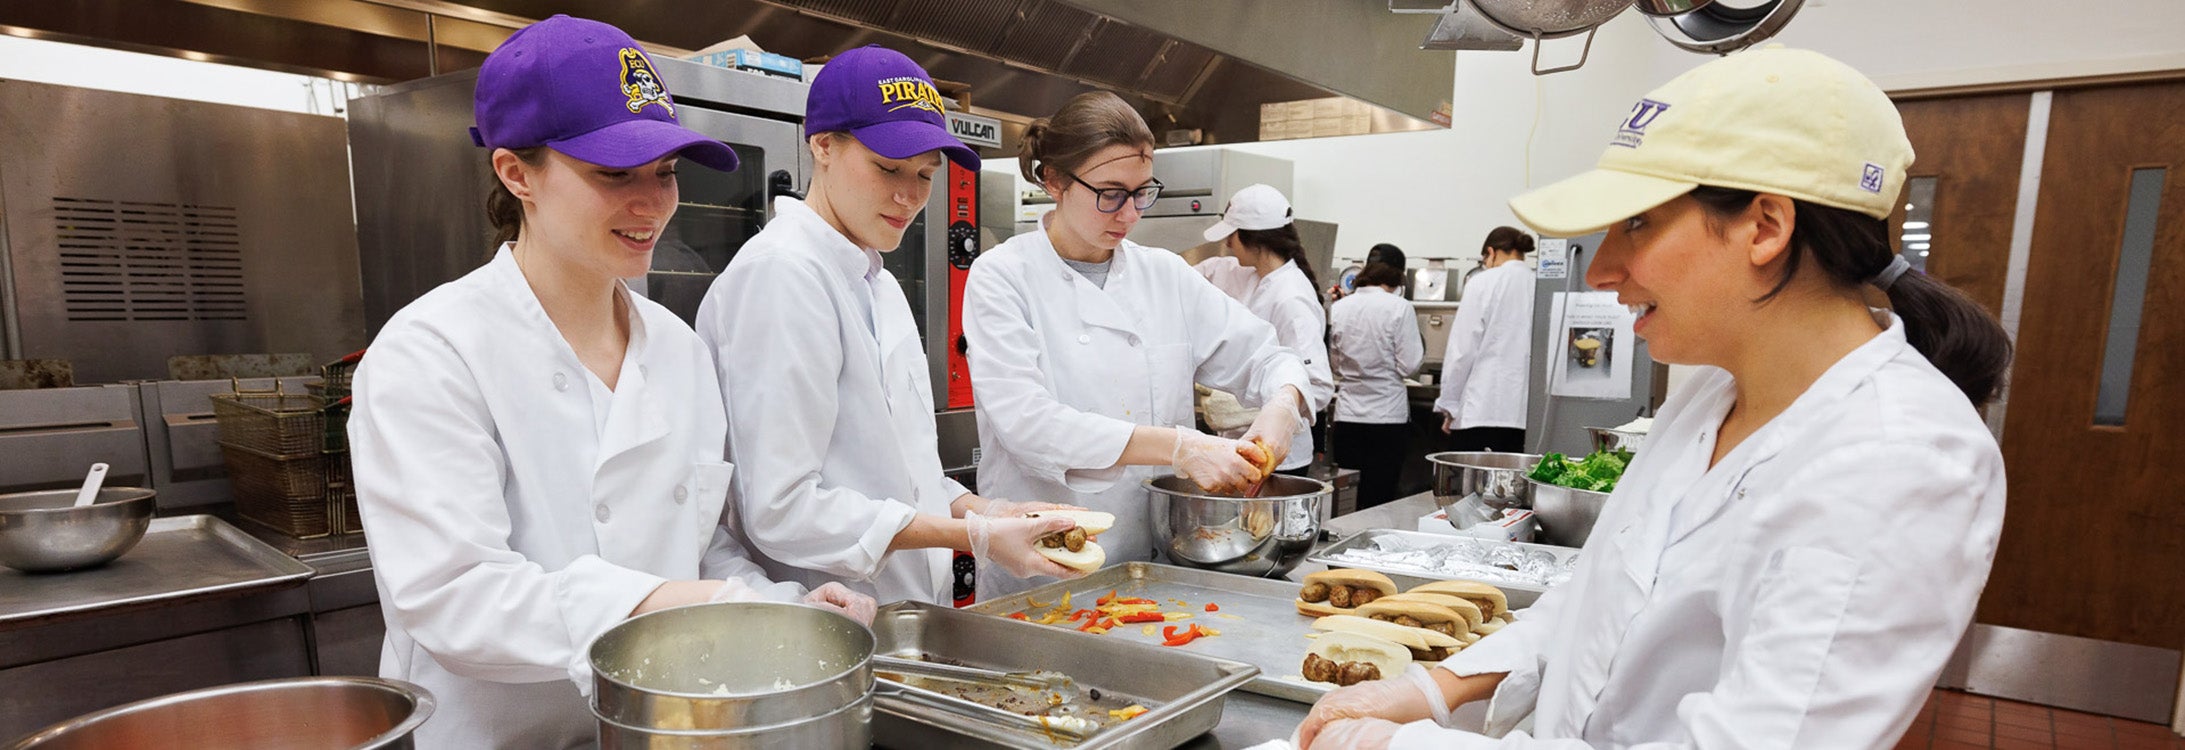 East Carolina University nutrition science students prepare and serve an Italian lunch in the Rivers Building.